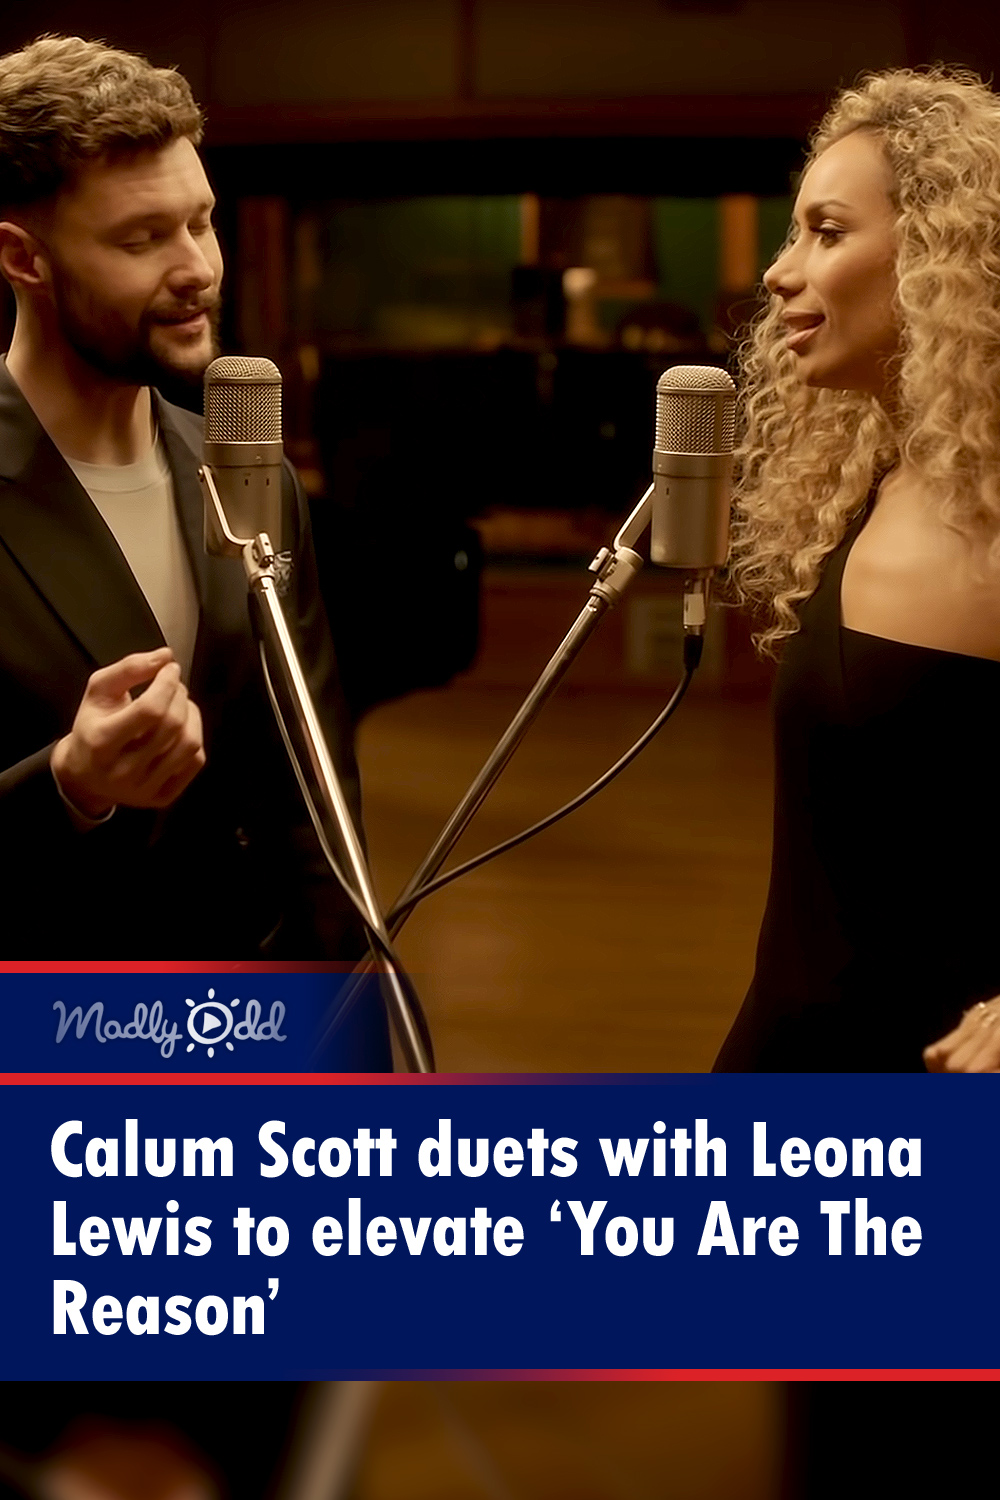 Calum Scott duets with Leona Lewis to elevate ‘You Are The Reason’